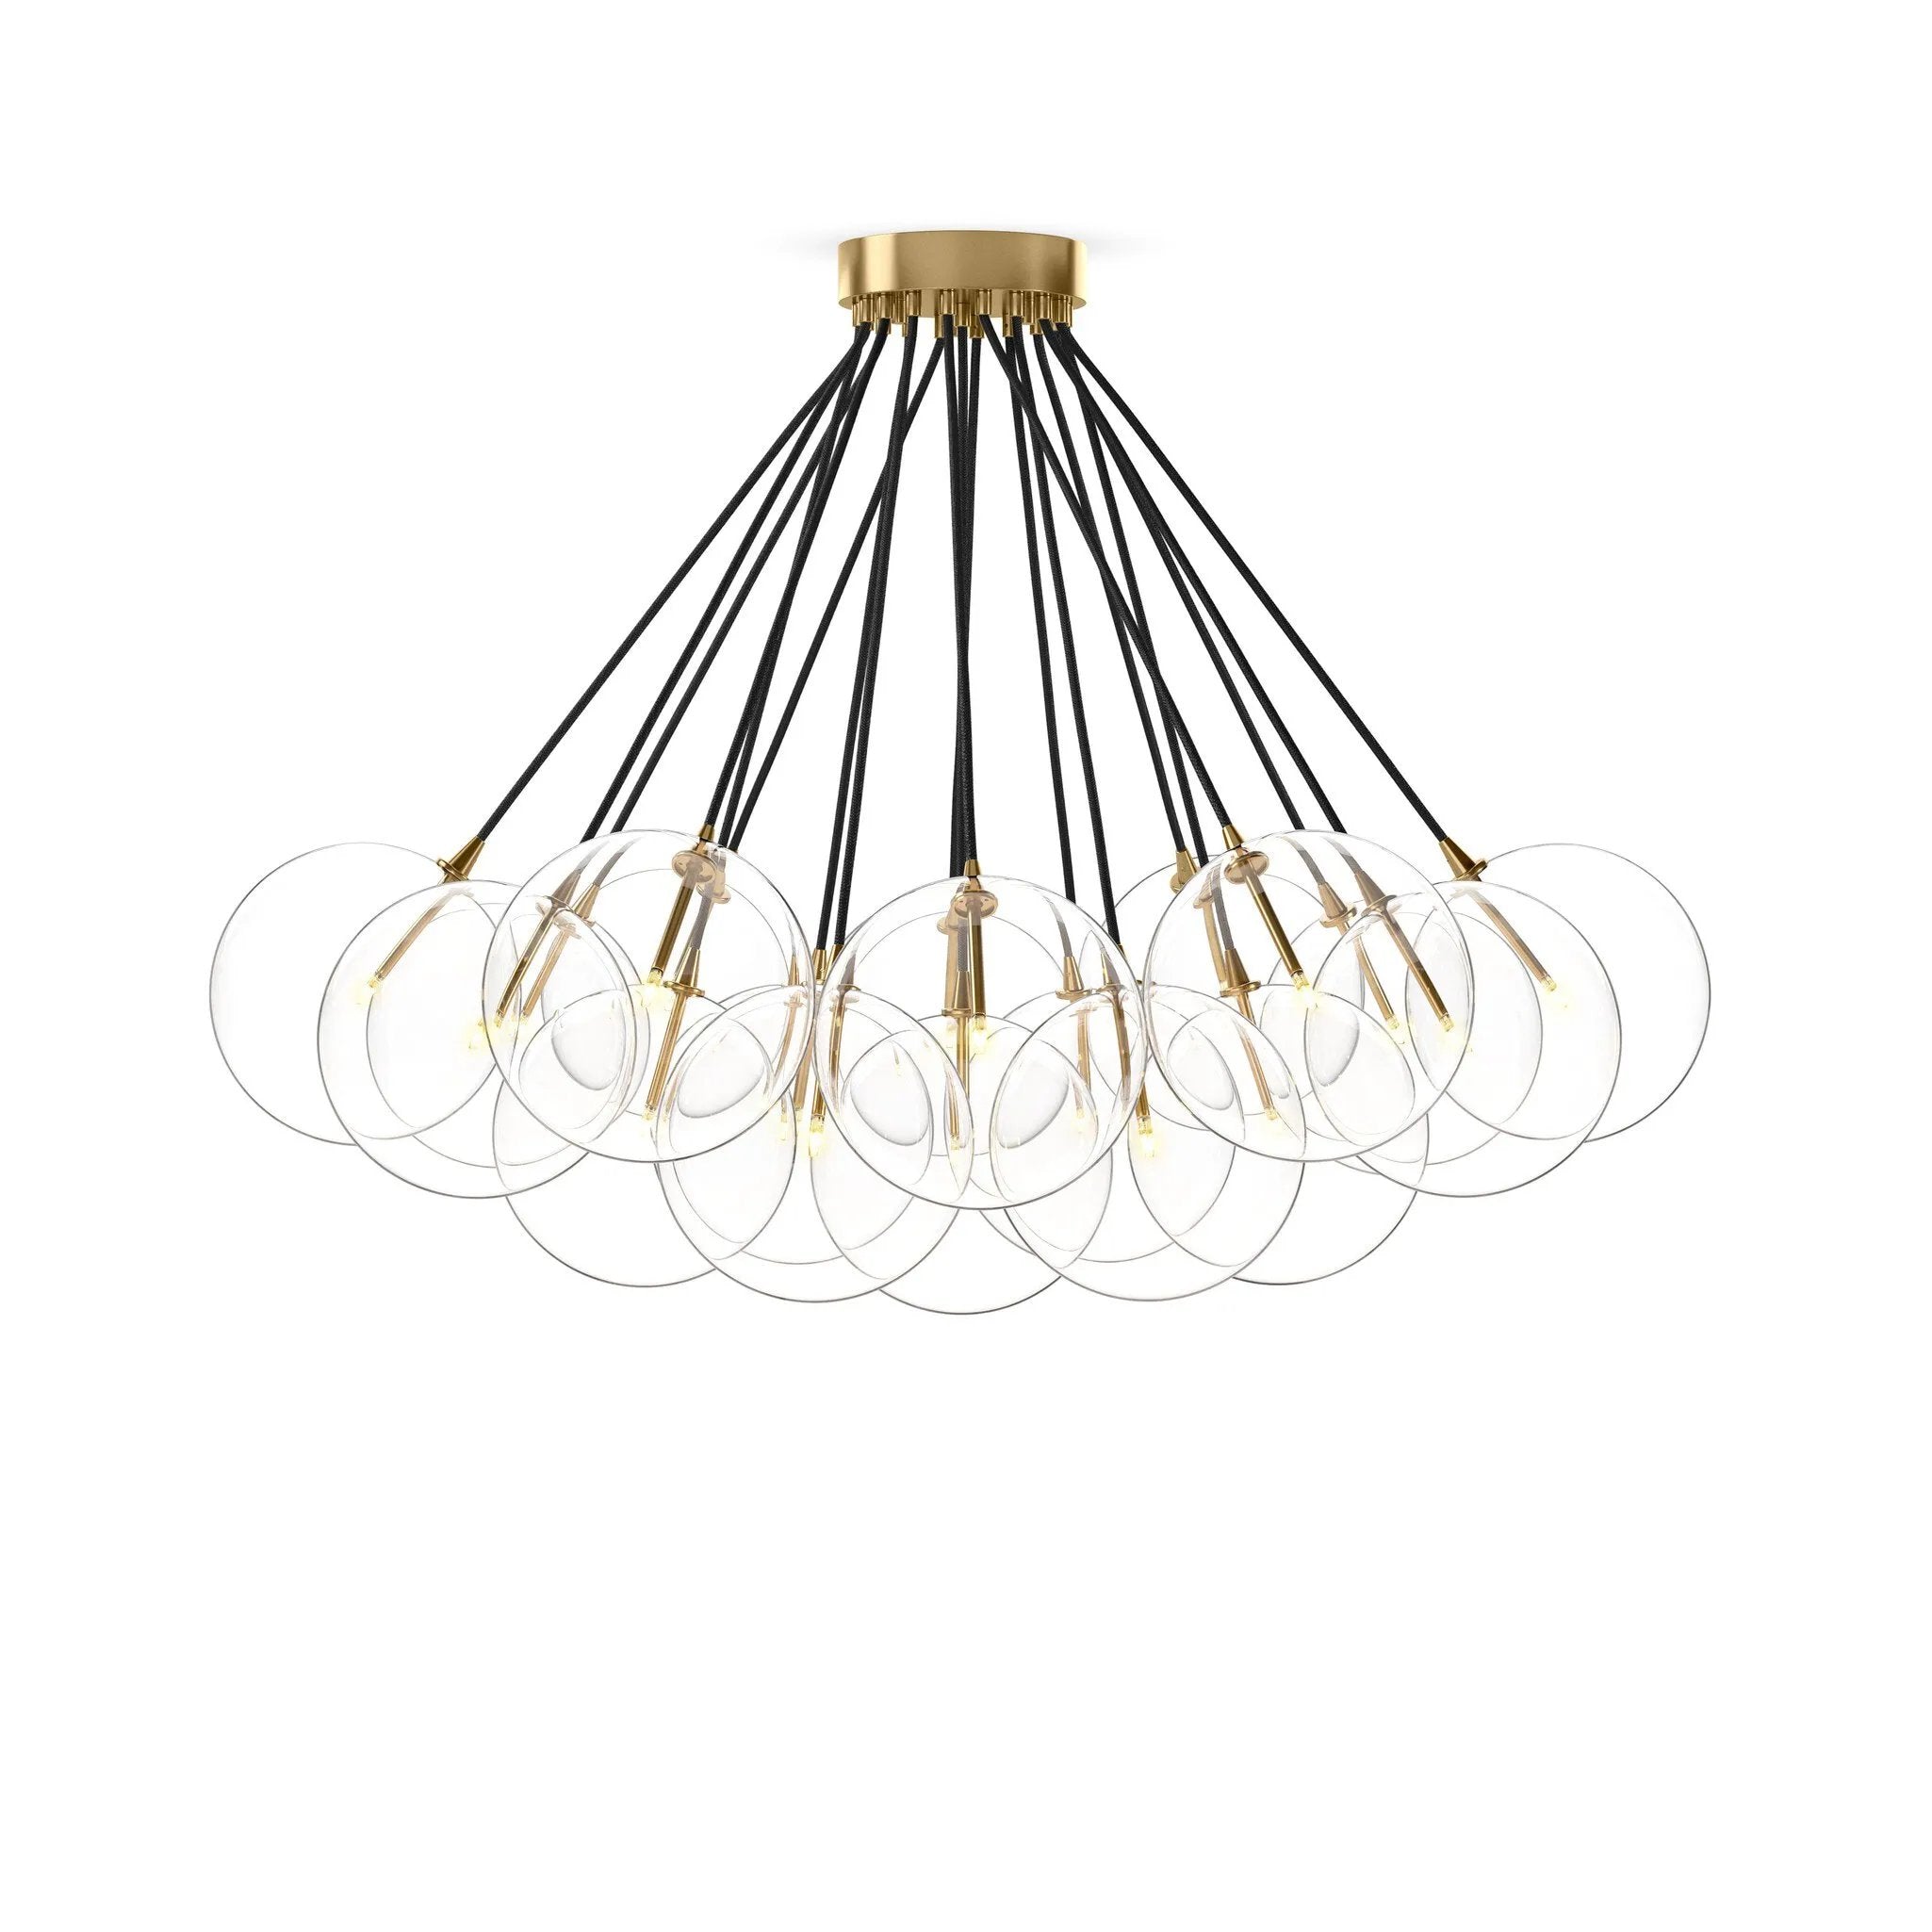 Clear glass bulbs dangle for a statement-making centerpiece. Each globe is individually blown, shaped and sculpted by hand through a one-hour process. Brass and glass are 98% recyclable. Designed and sustainably crafted in Poland by Schwung.Overall Dimensions47.00"w x 47.00"d x 33.50"hFull Details &amp; SpecificationsTear Shee Amethyst Home provides interior design, new home construction design consulting, vintage area rugs, and lighting in the Tampa metro area.